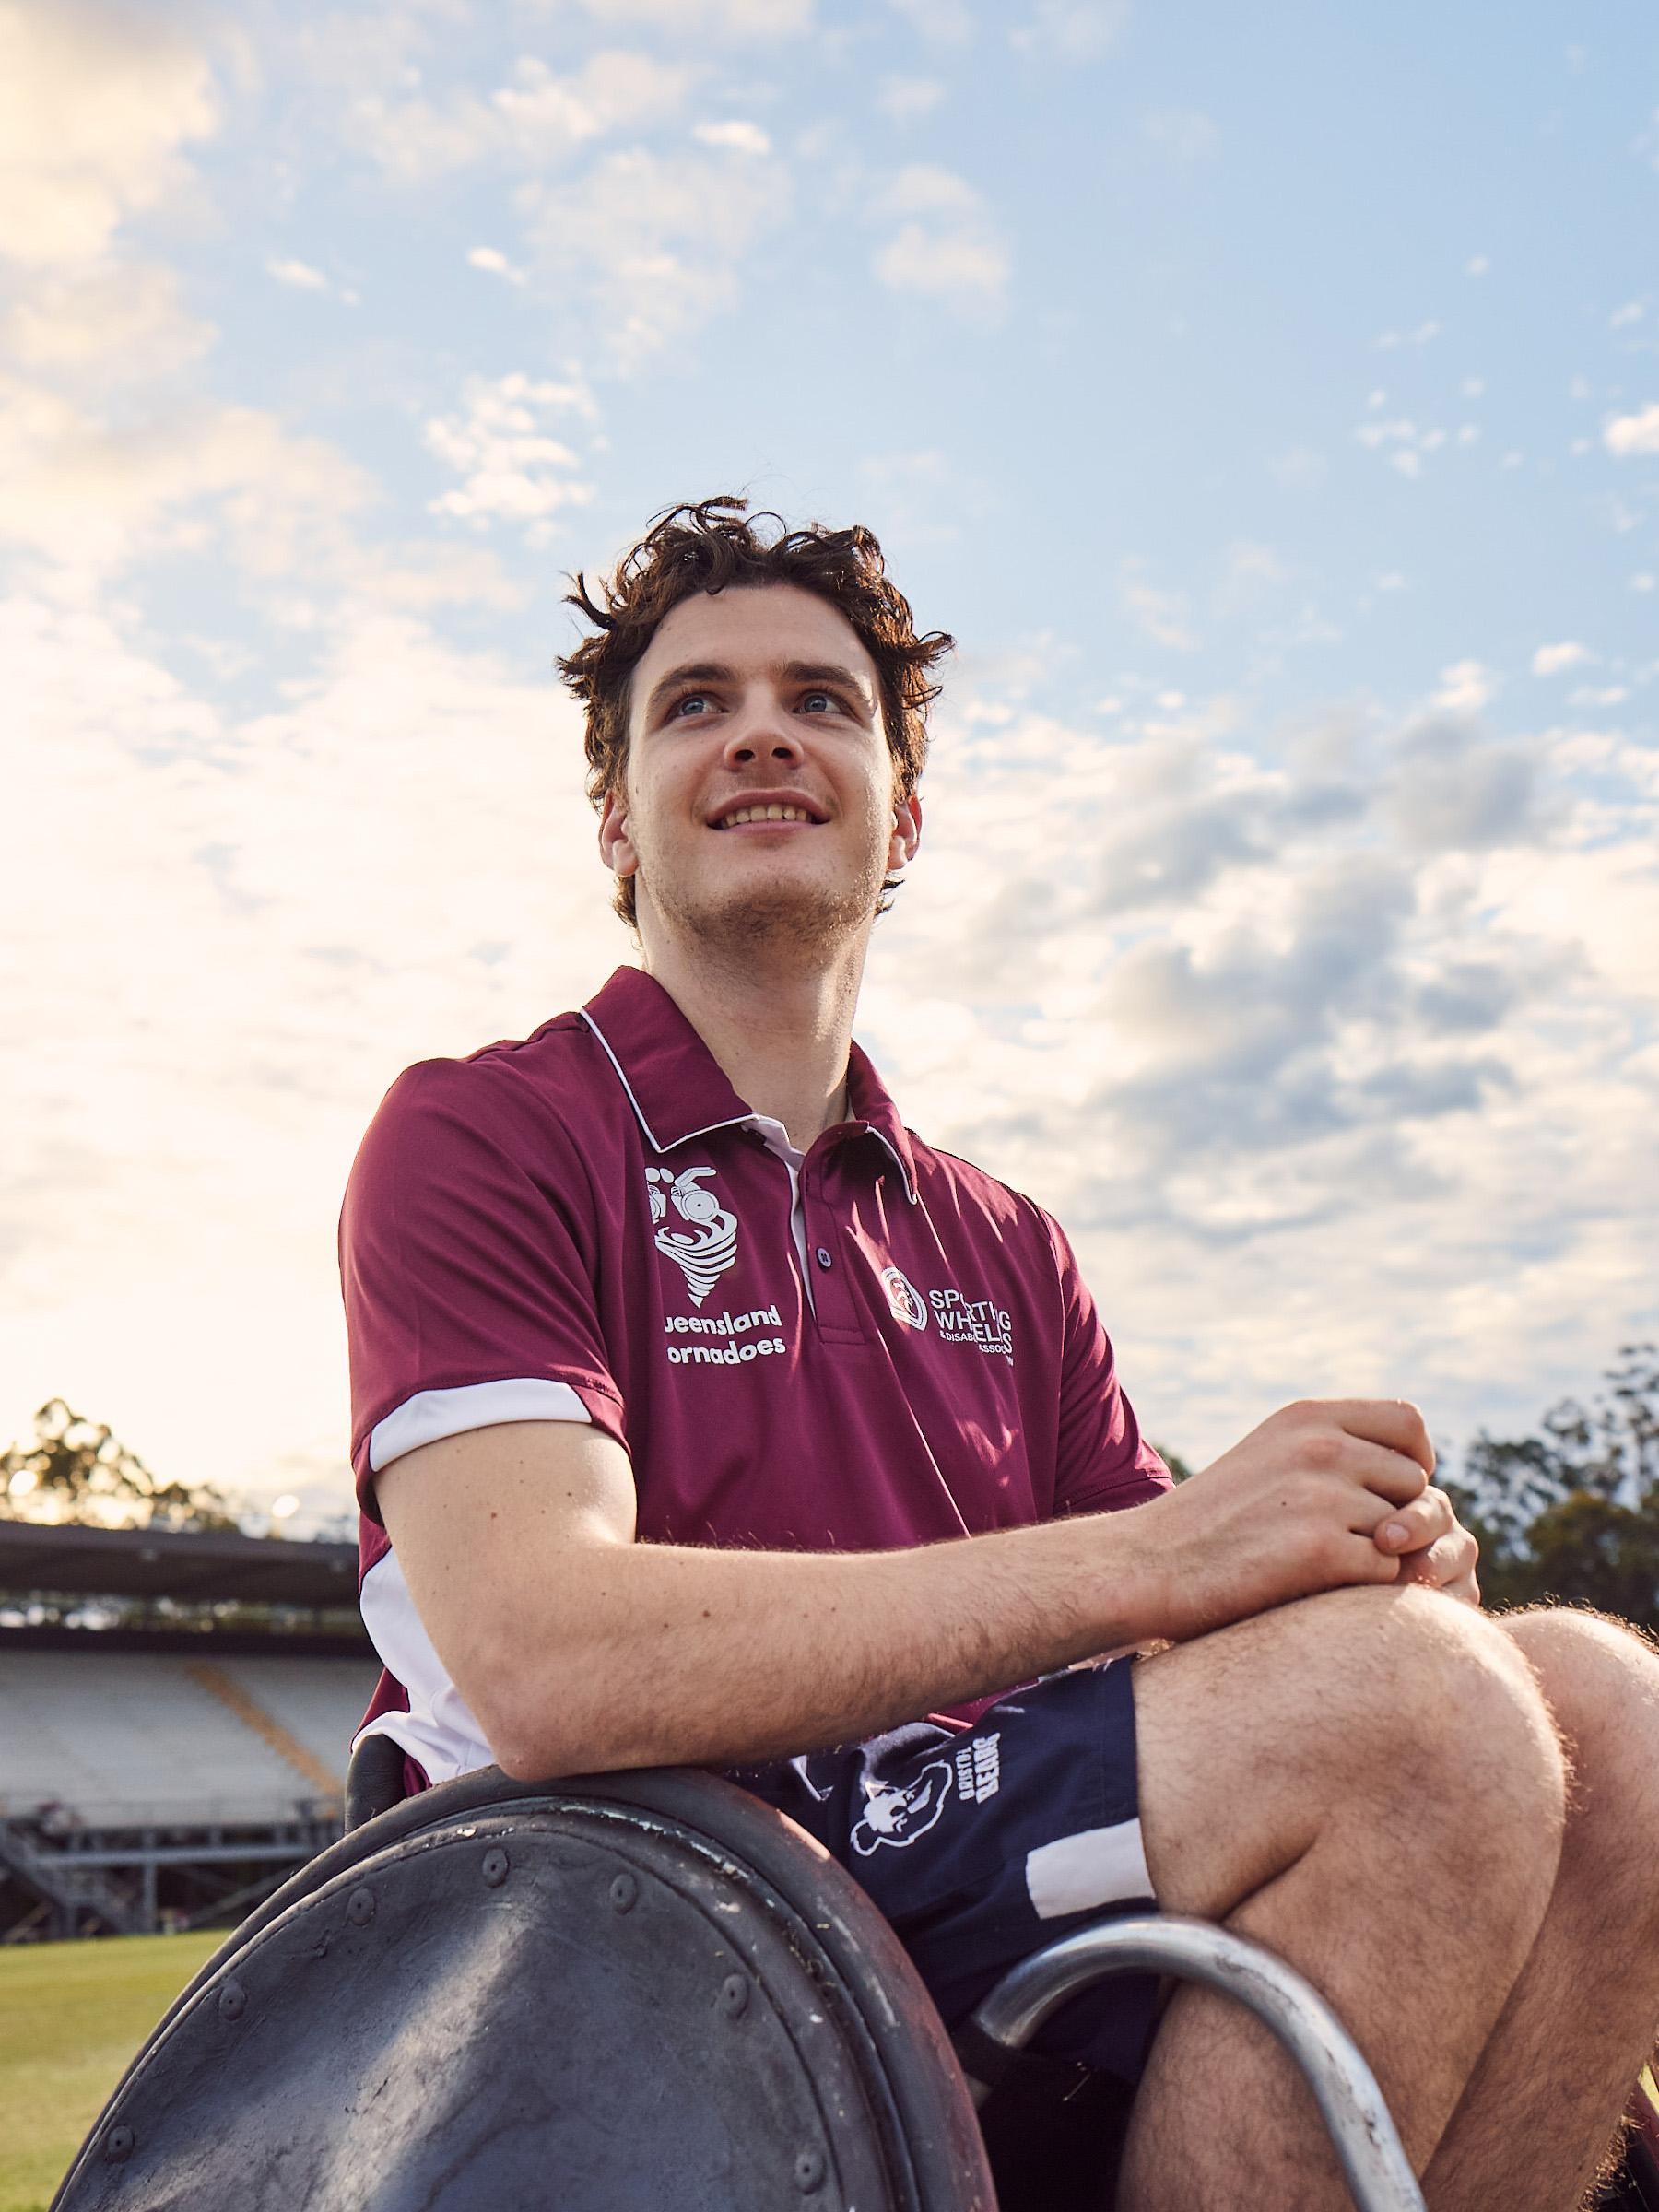 Low-angle shot of a smiling athlete in a wheelchair on a sports oval